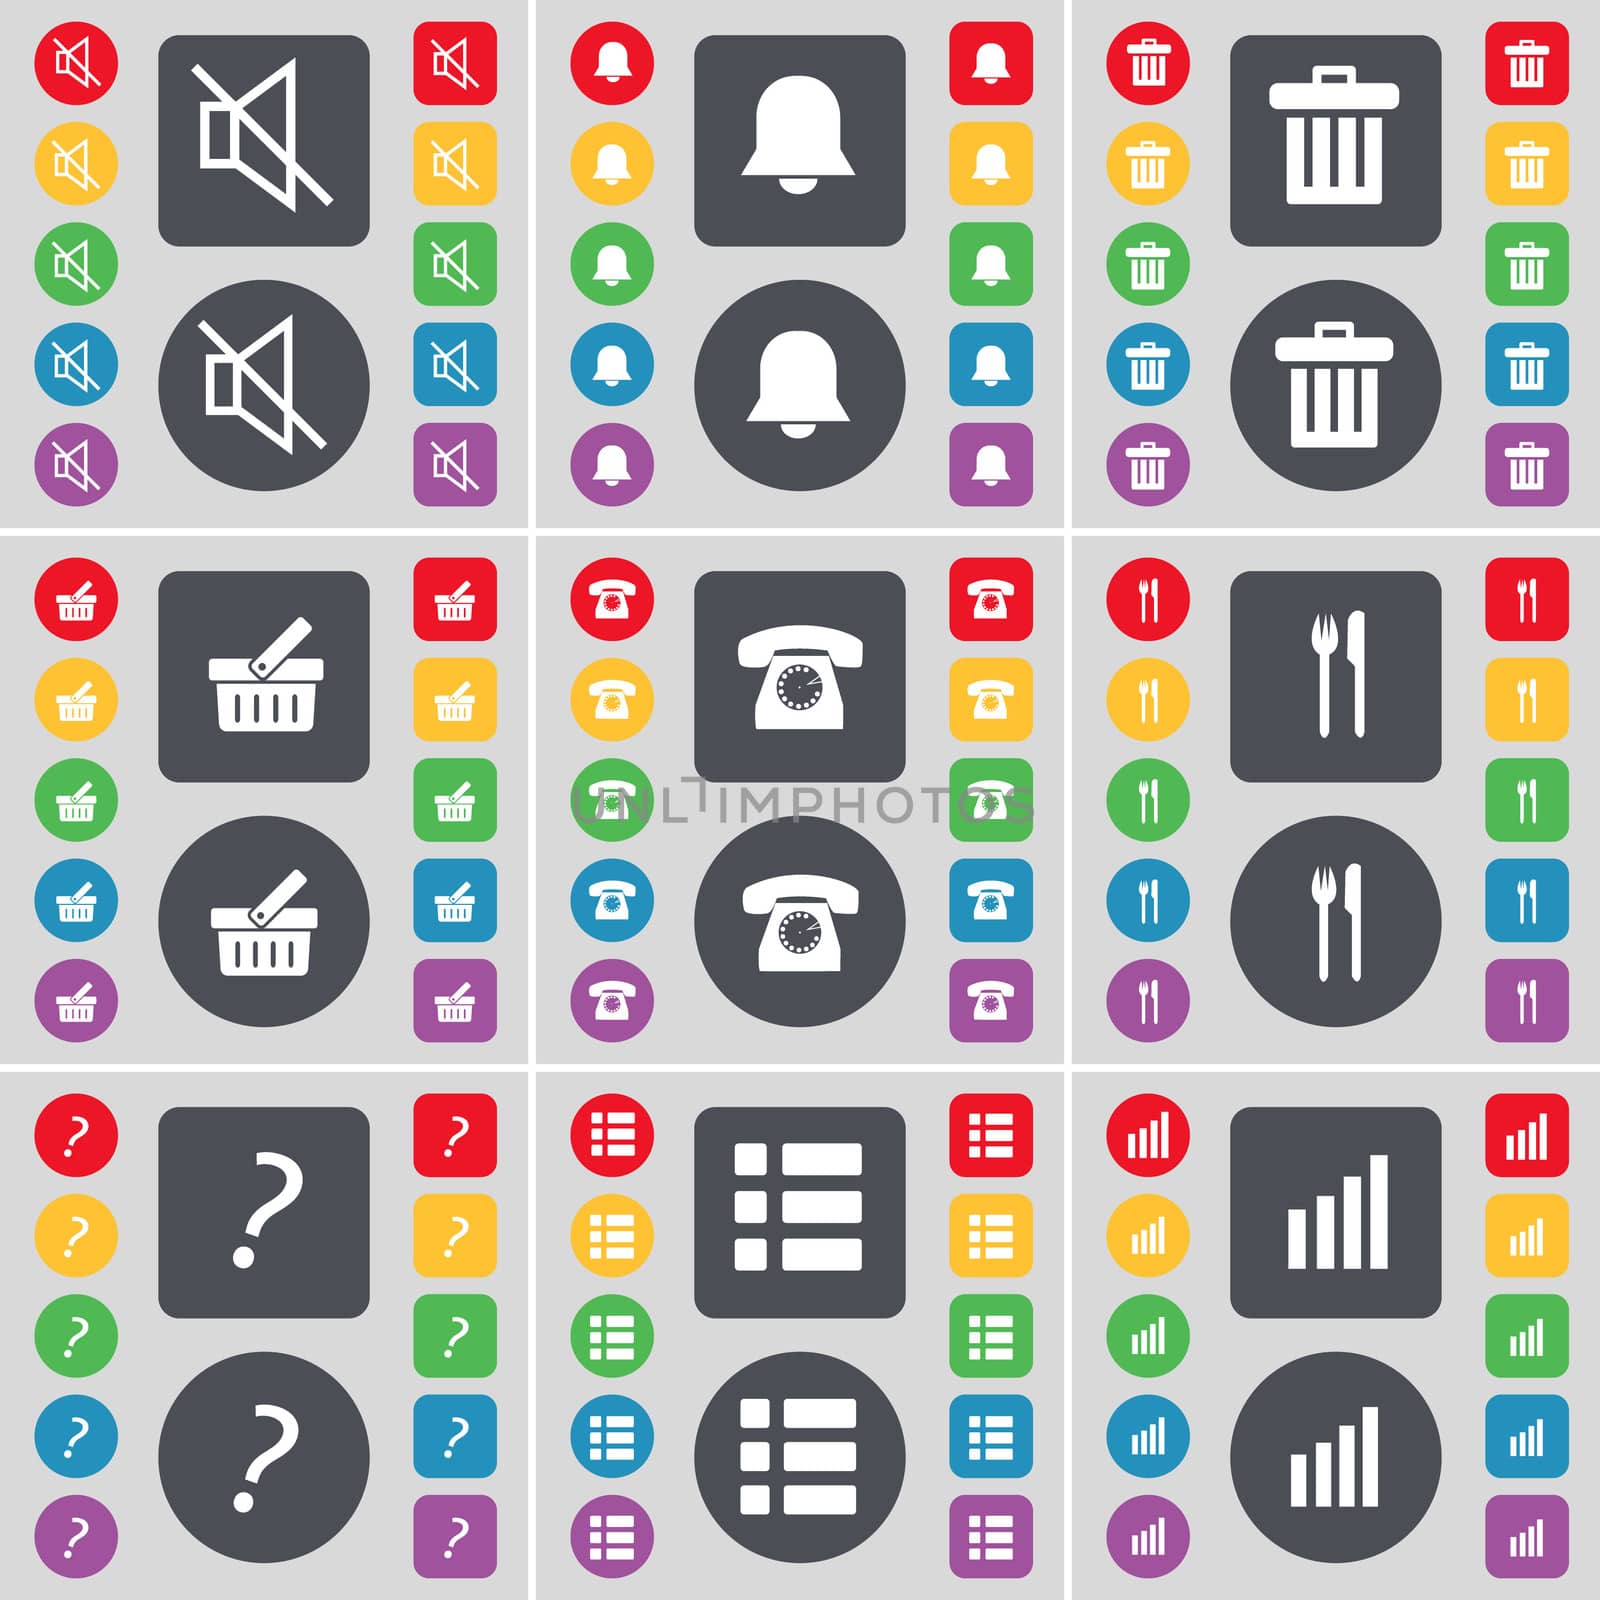 Mute, Notification, Trash can, Basket, Retro phone, Fork and knife, Question mark, List, Diagram icon symbol. A large set of flat, colored buttons for your design. illustration